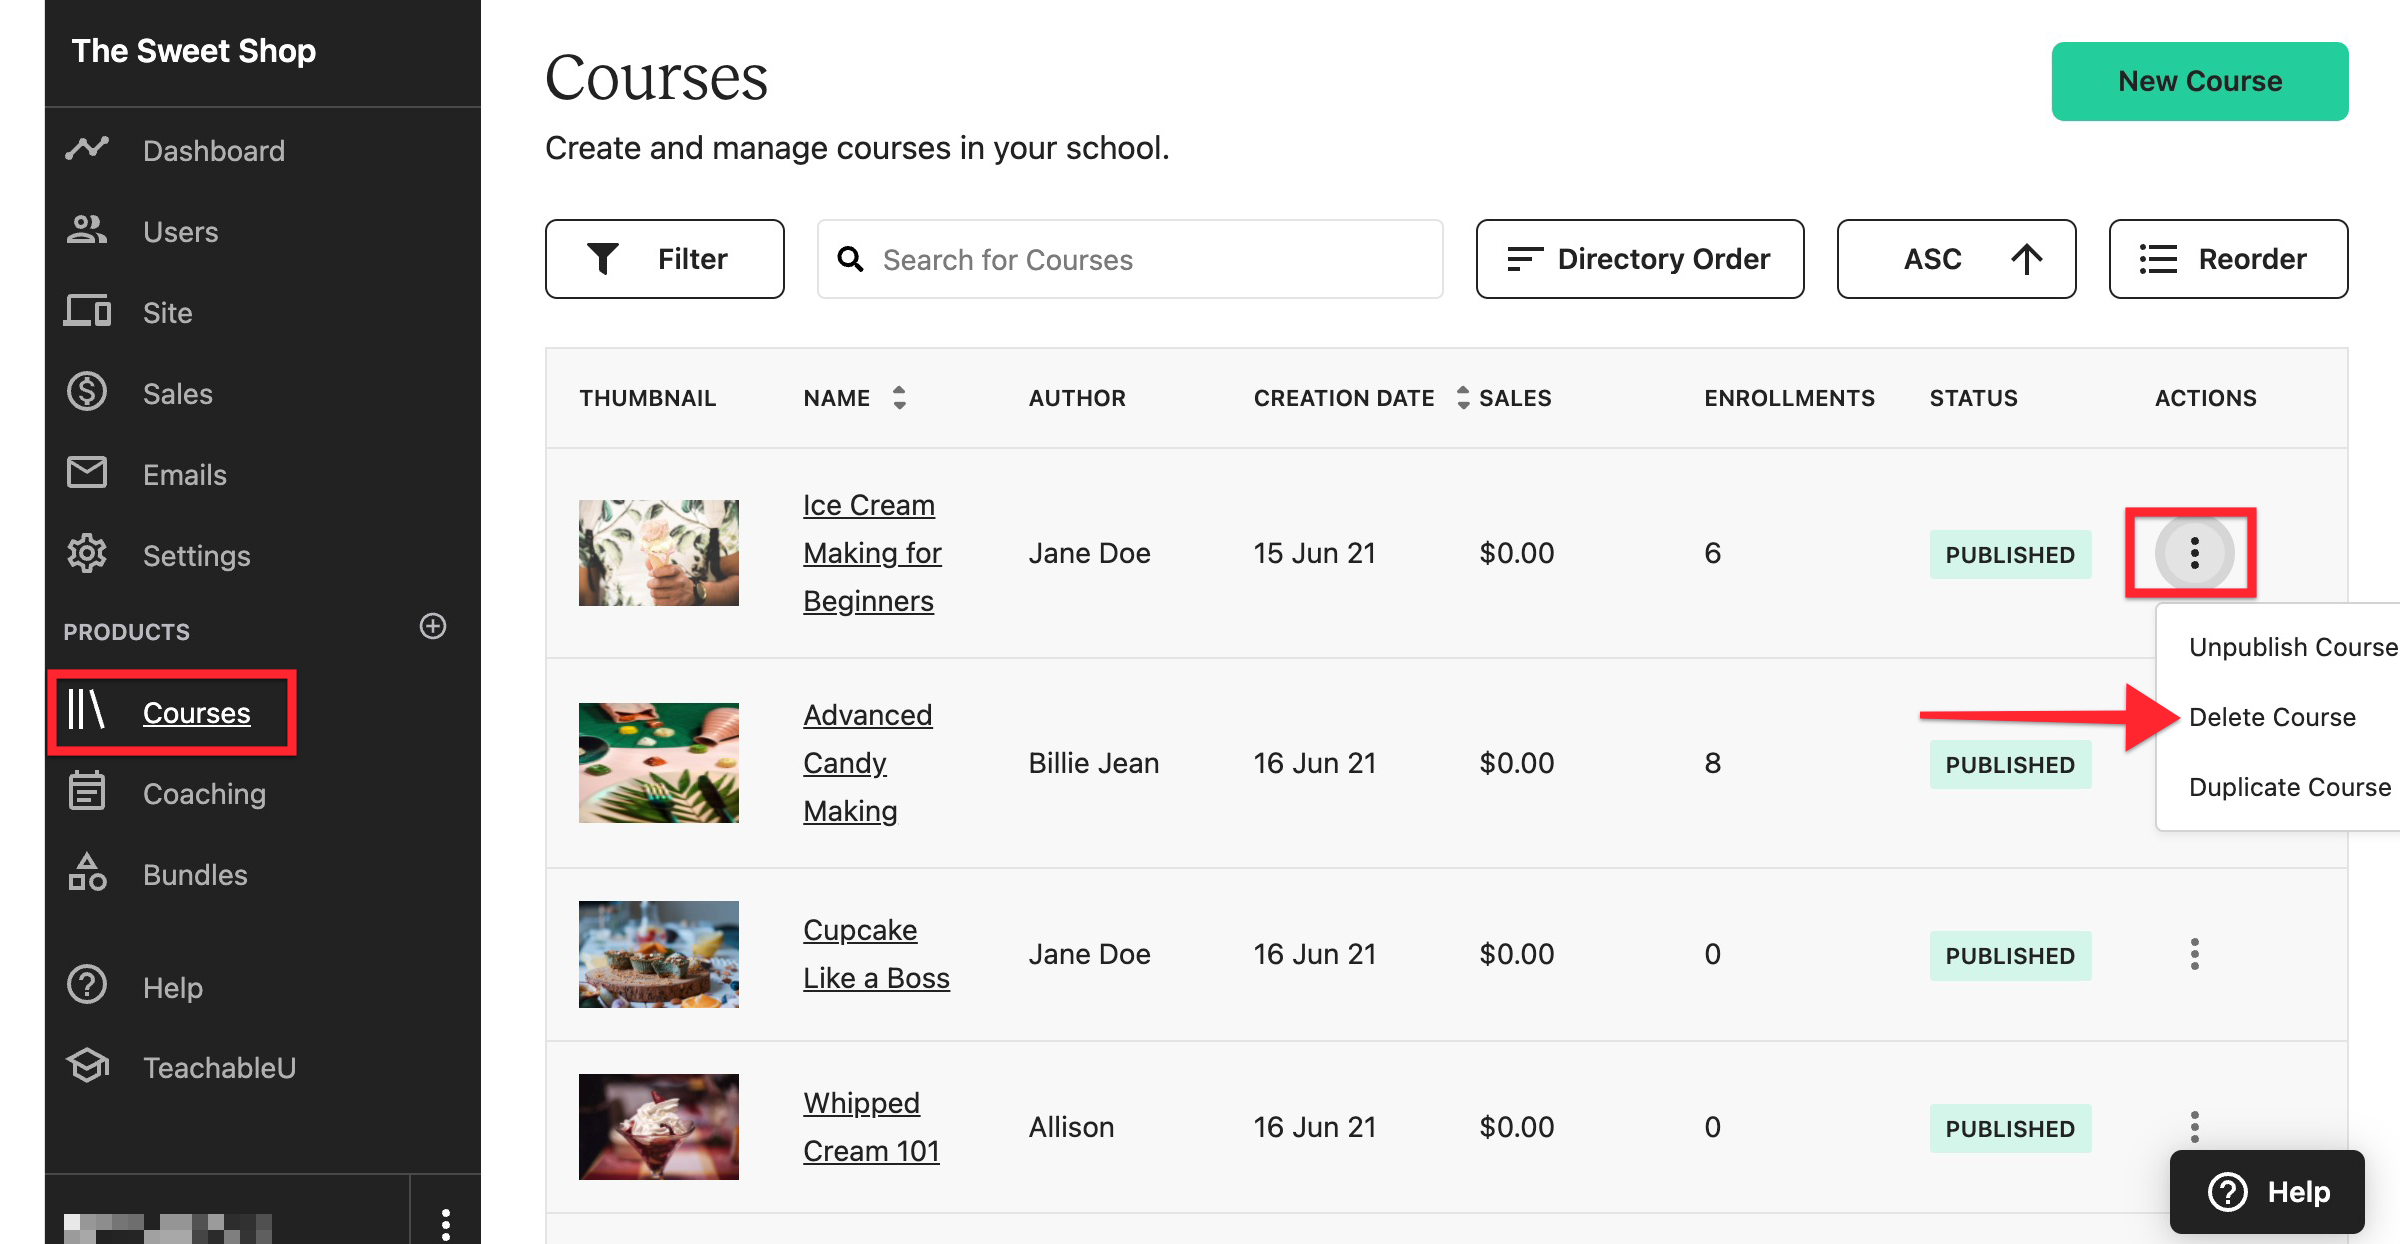 The COURSES tab from the left side navigation menu is selected and there is a list of courses displayed. Next to the first course on the list, the MORE OPTIONS icon is selected, and from that dropdown menu, the DELETE COURSE button is circled.